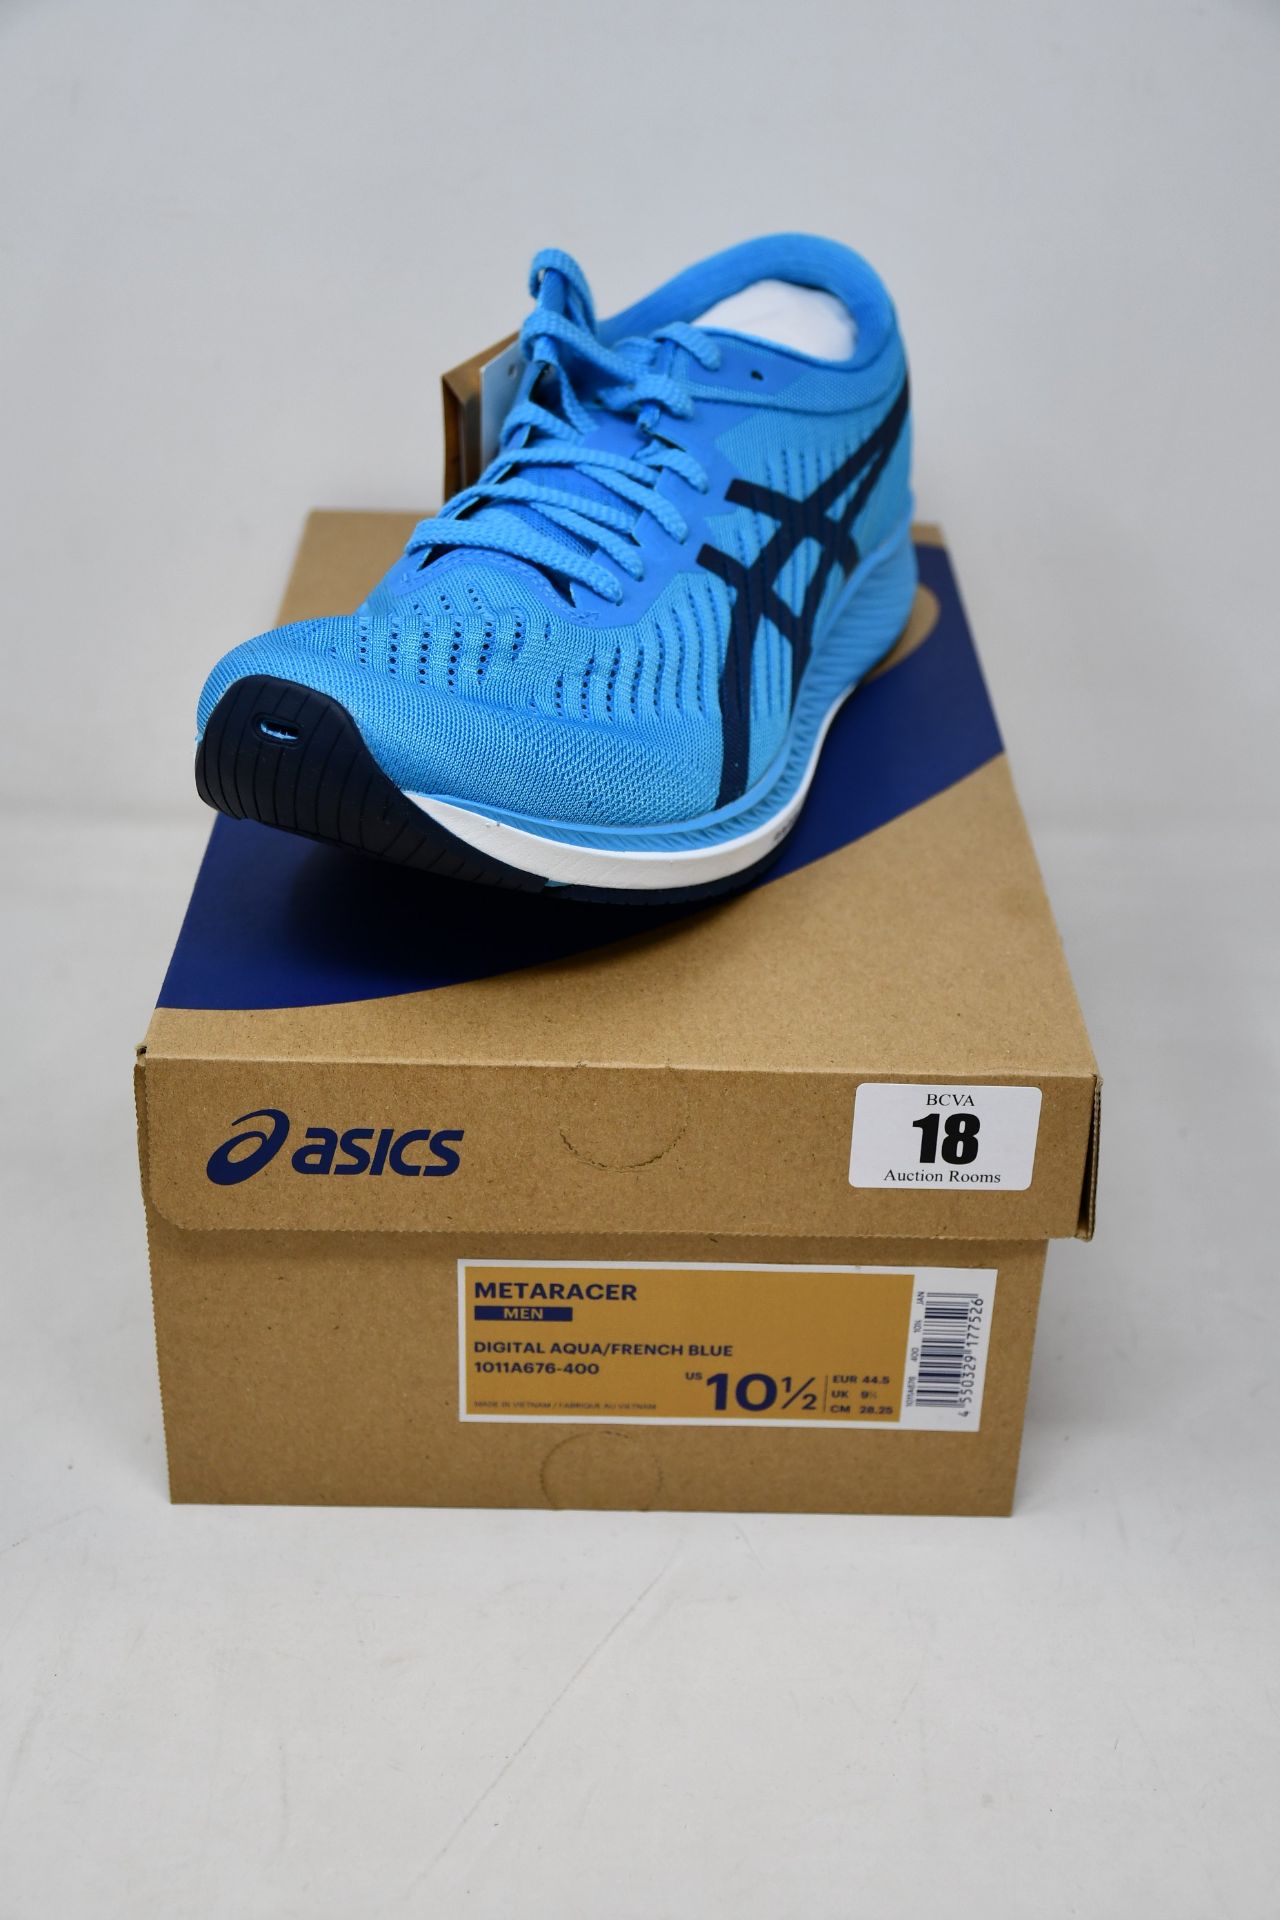 A pair of as new Asics Metaracer trainers (UK 9.5).